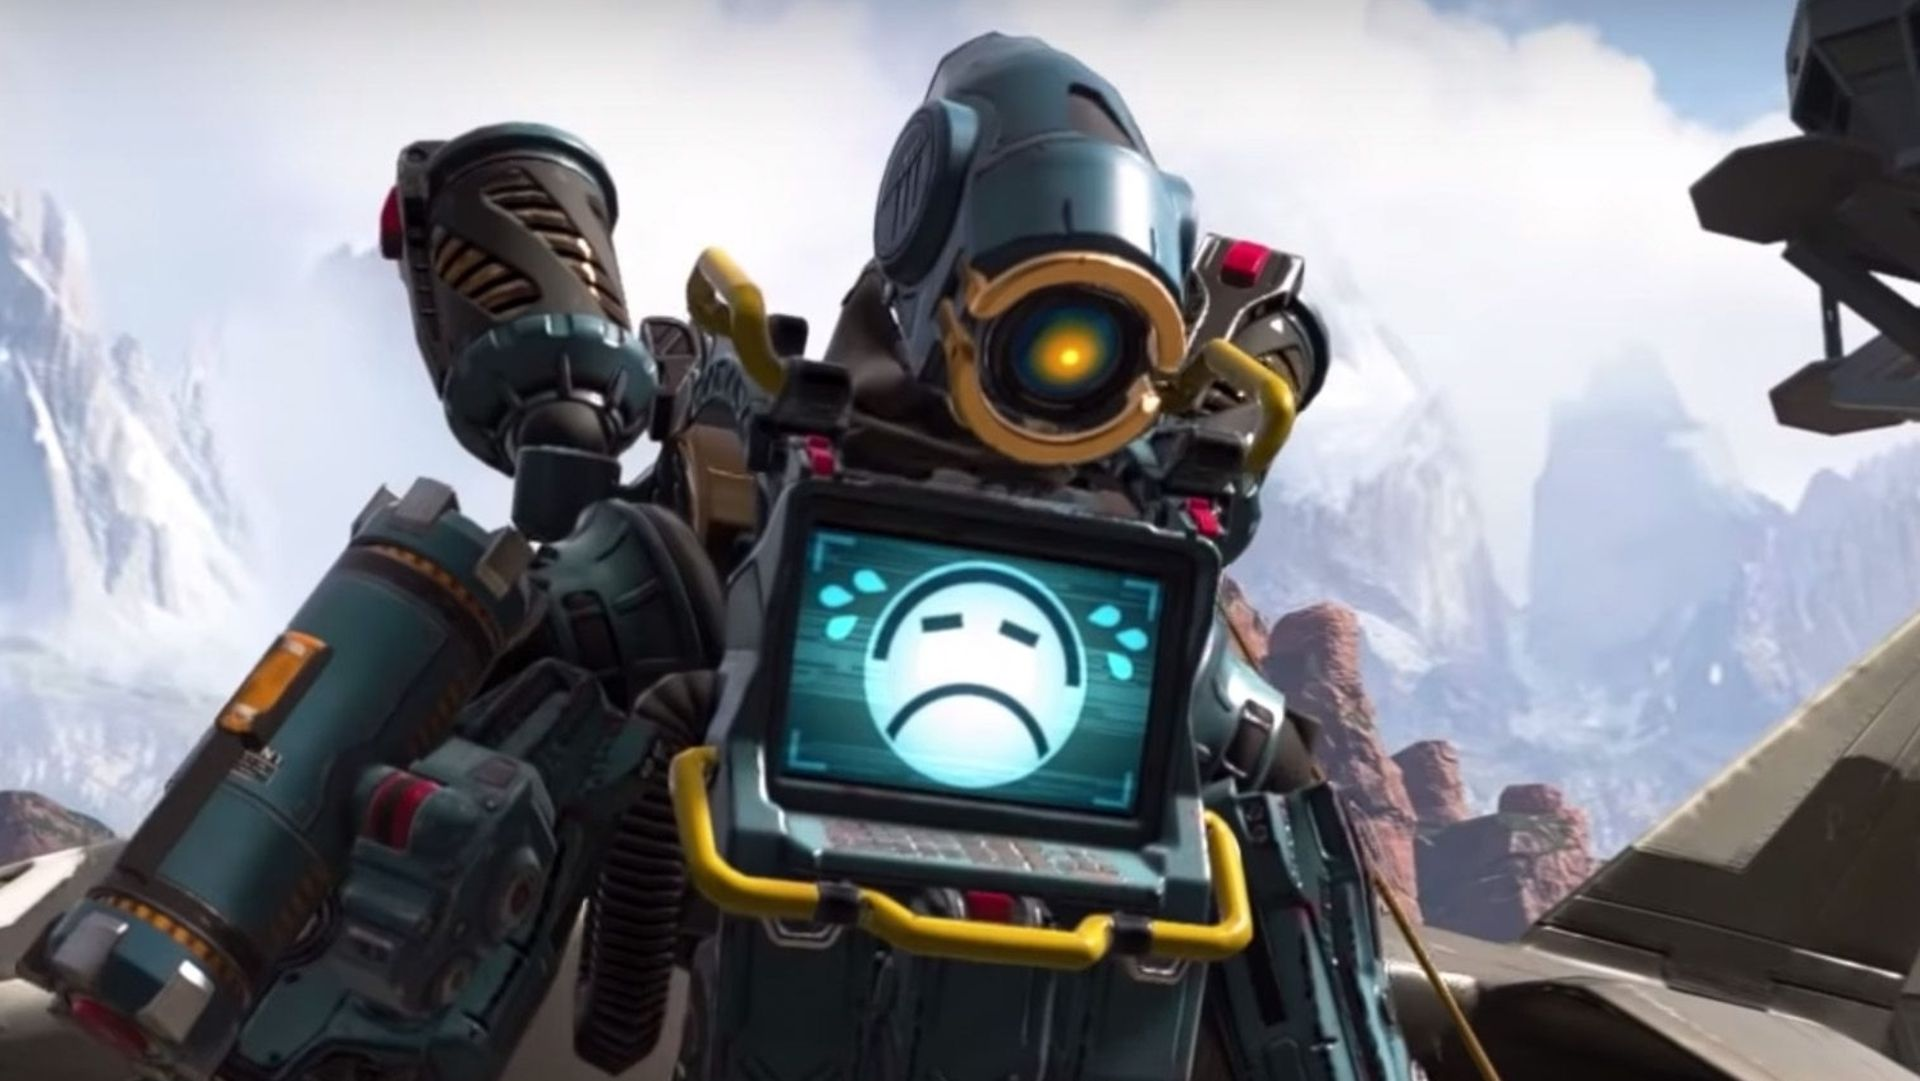 The 17 Best Games Like 'Apex Legends